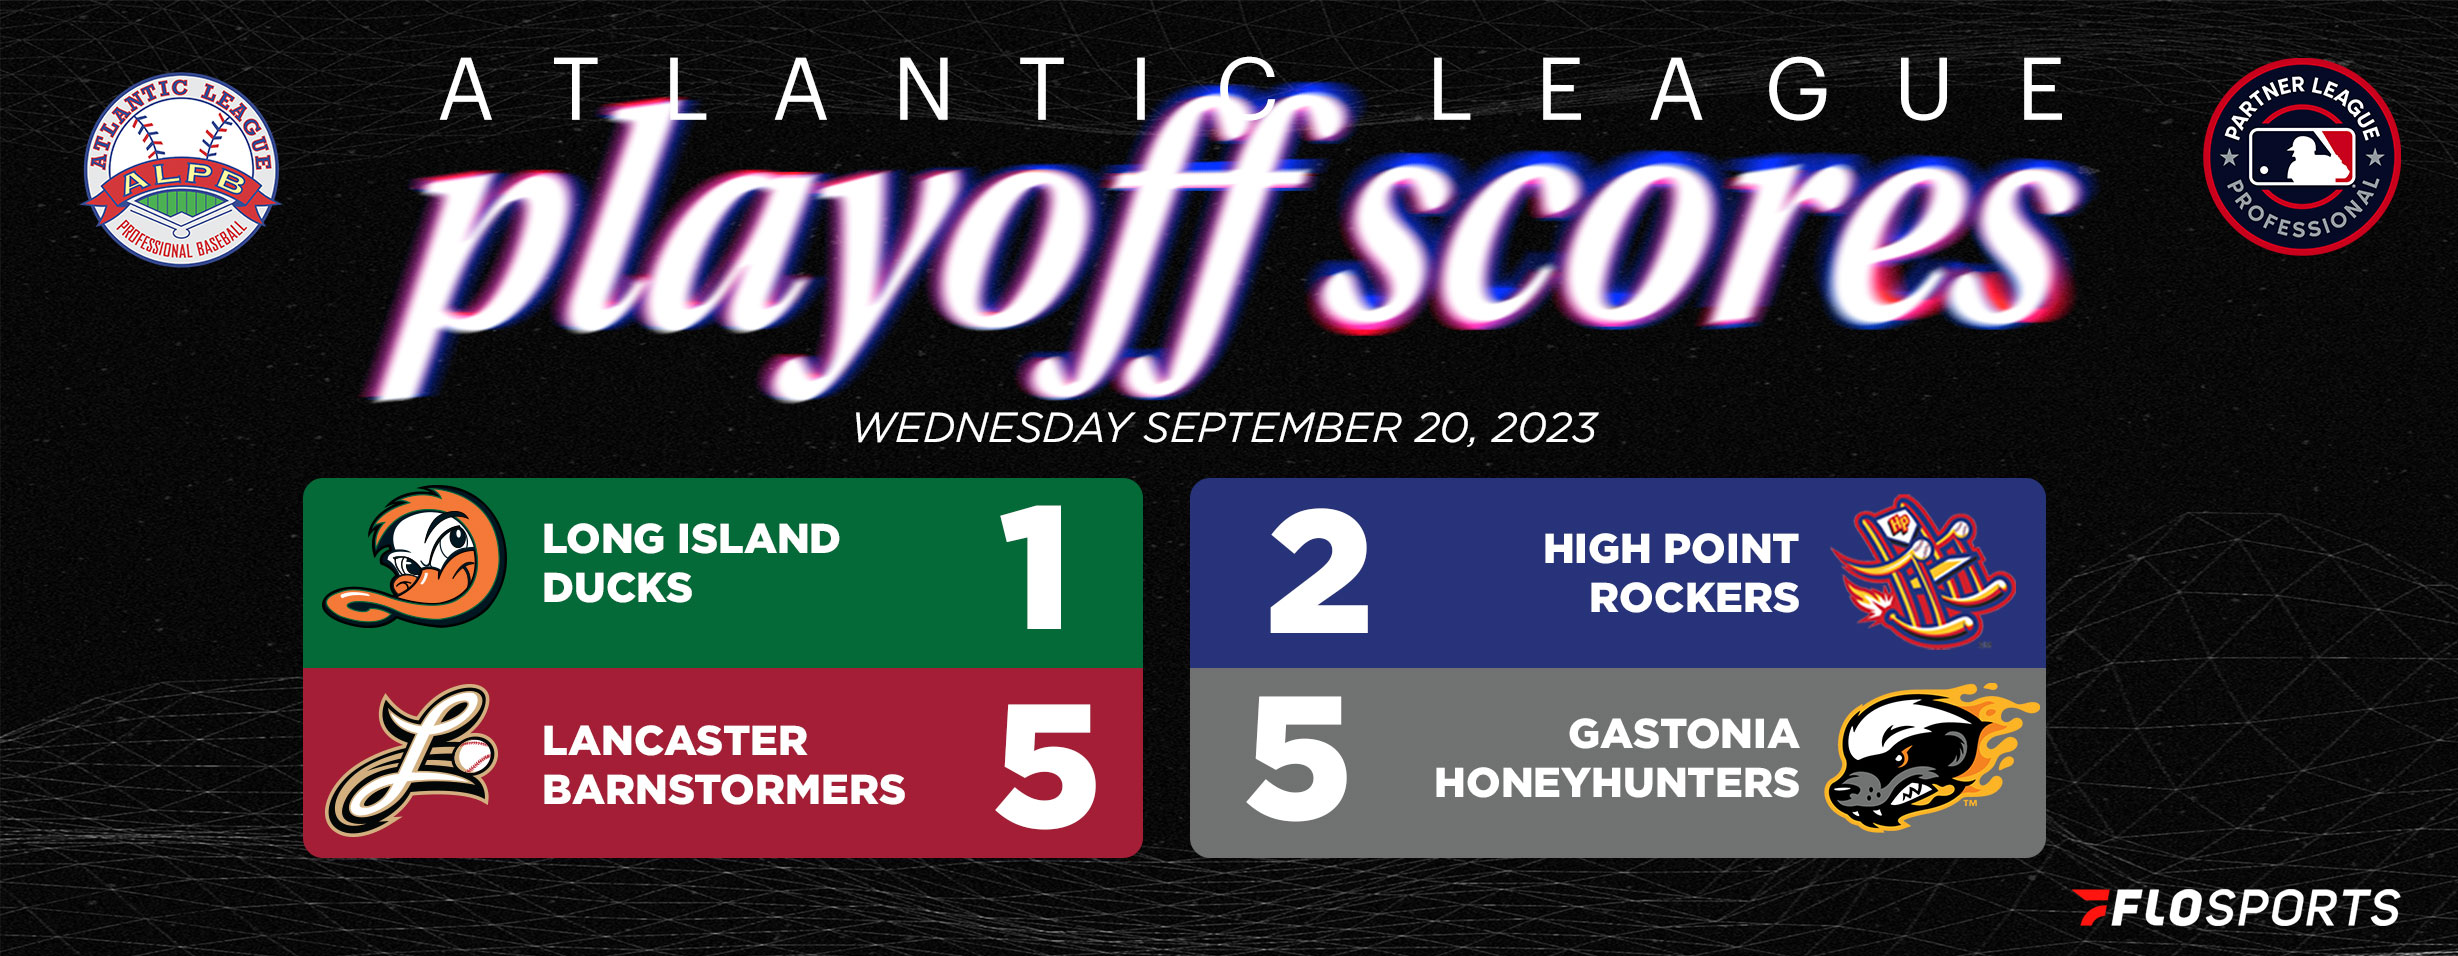 Atlantic League Playoff Results, Sept. 20, 2023